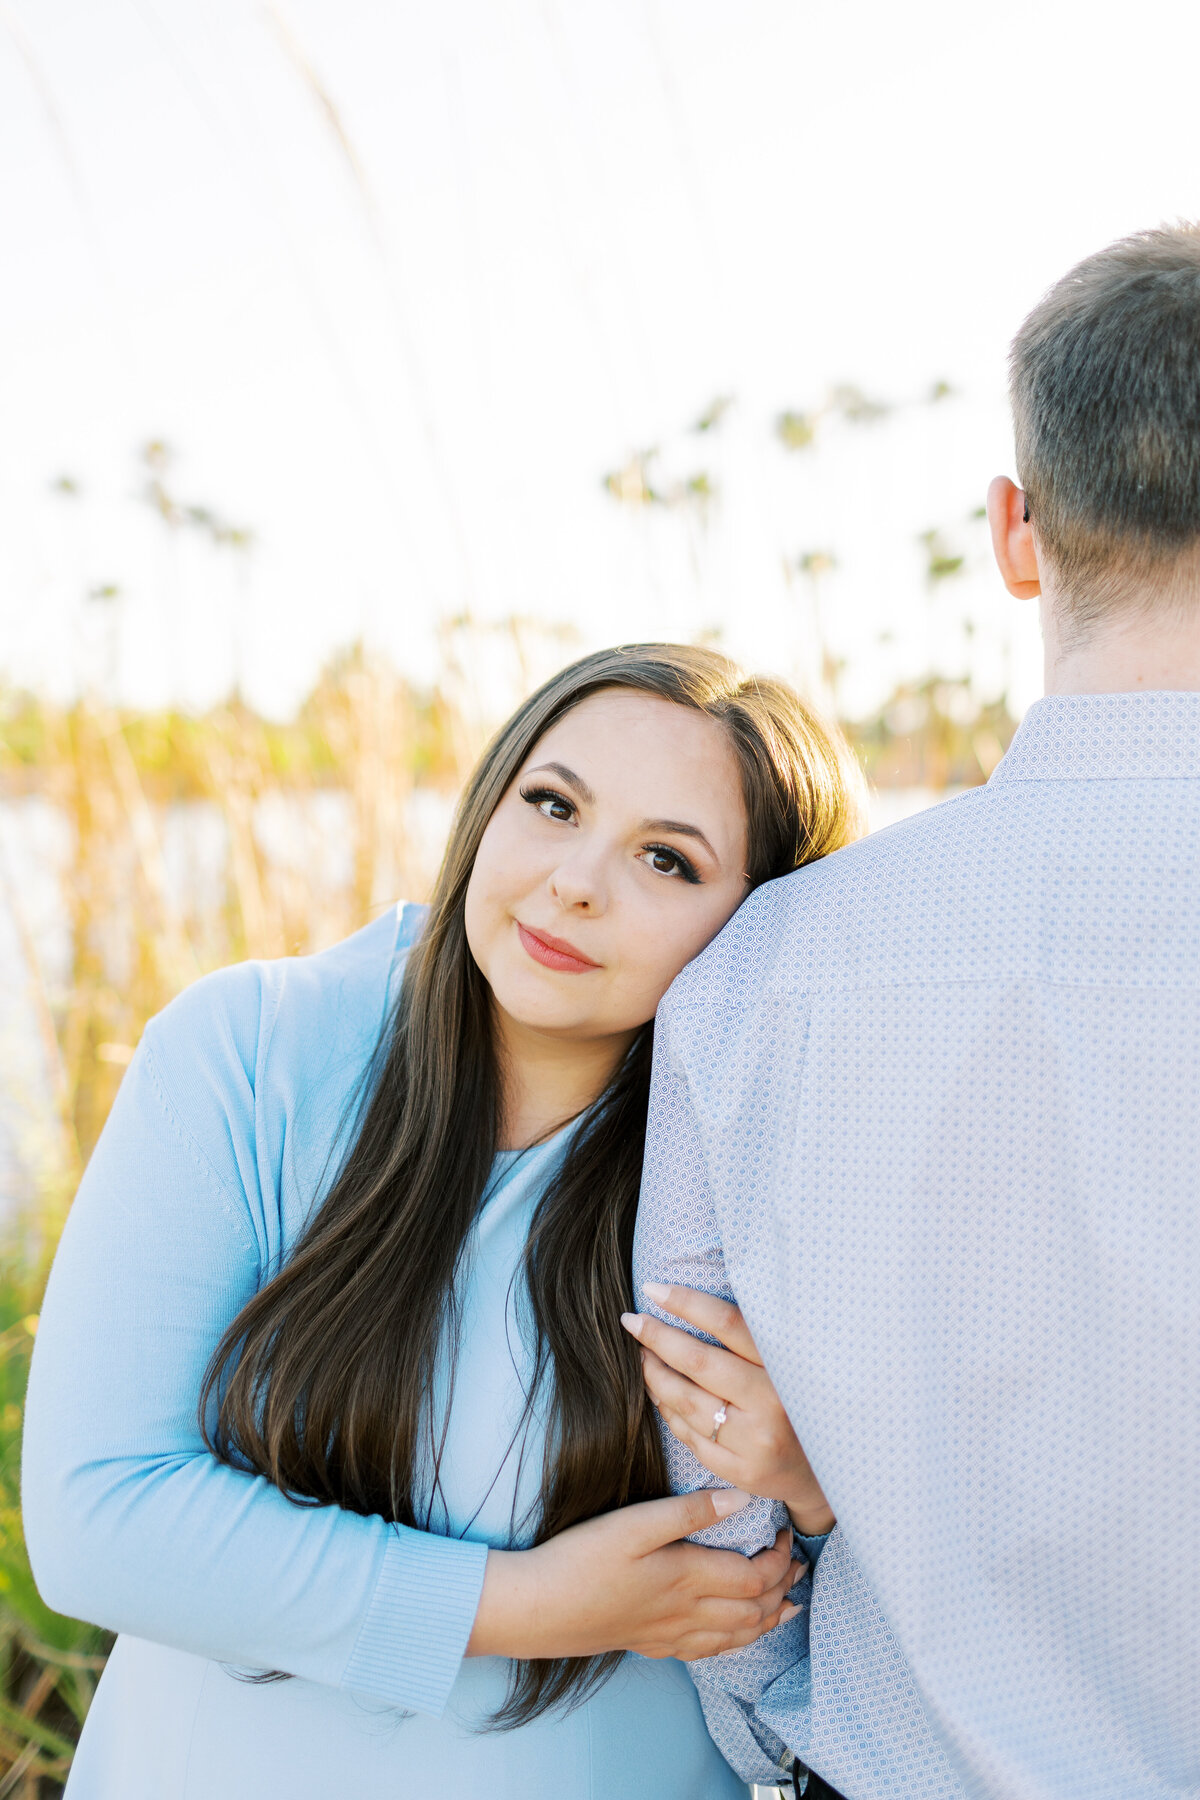 Papago Park Engagement Session